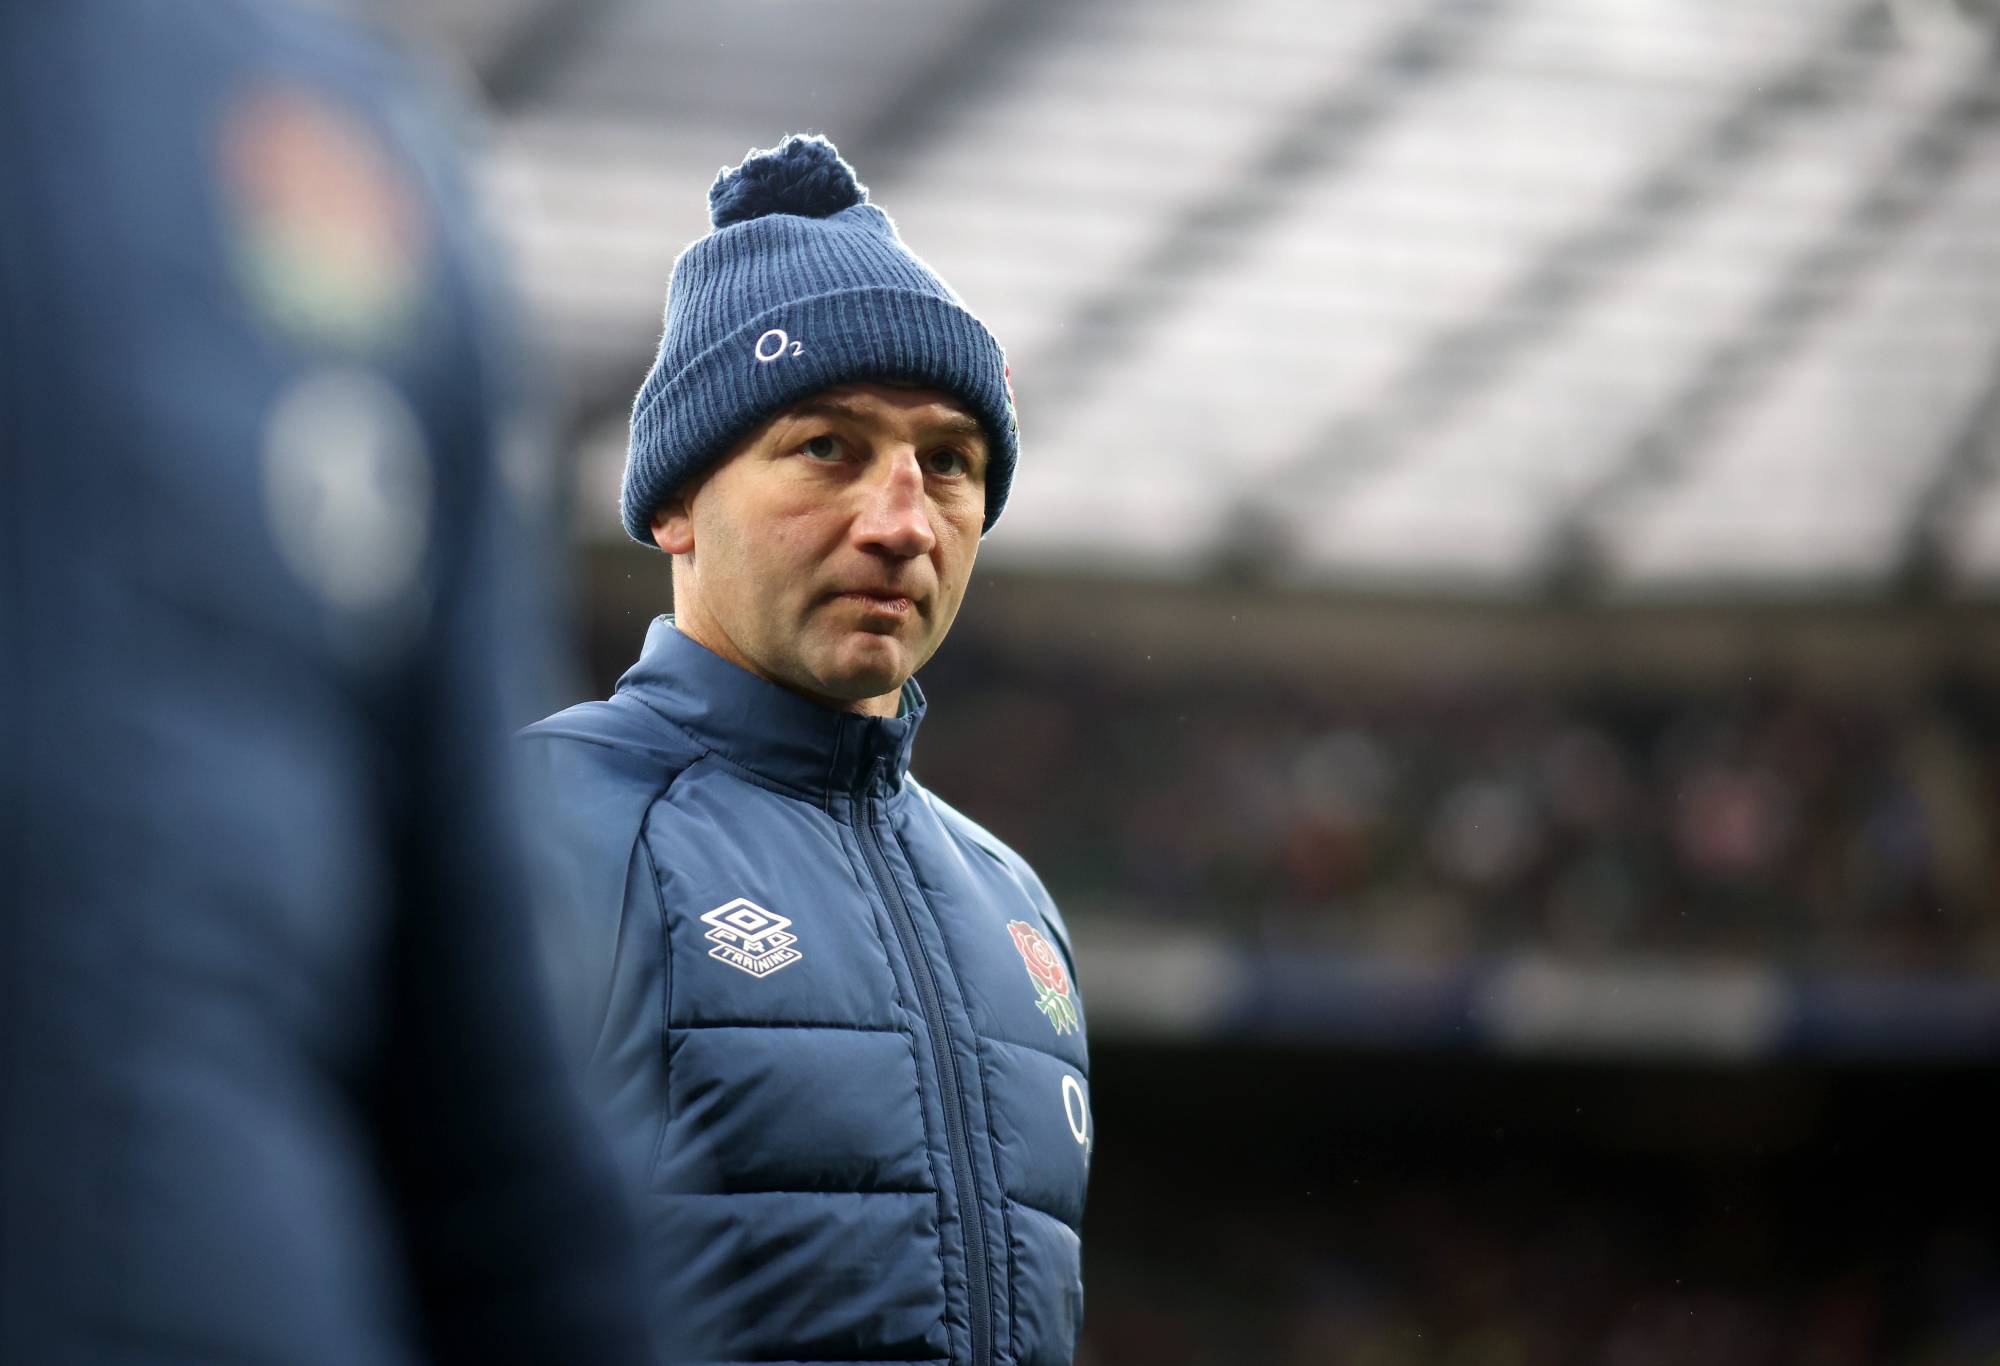 Steve Borthwick, Head Coach of England looks on prior to the Six Nations Rugby match between England and Italy at Twickenham Stadium on February 12, 2023 in London, England. (Photo by Paul Harding/Getty Imag